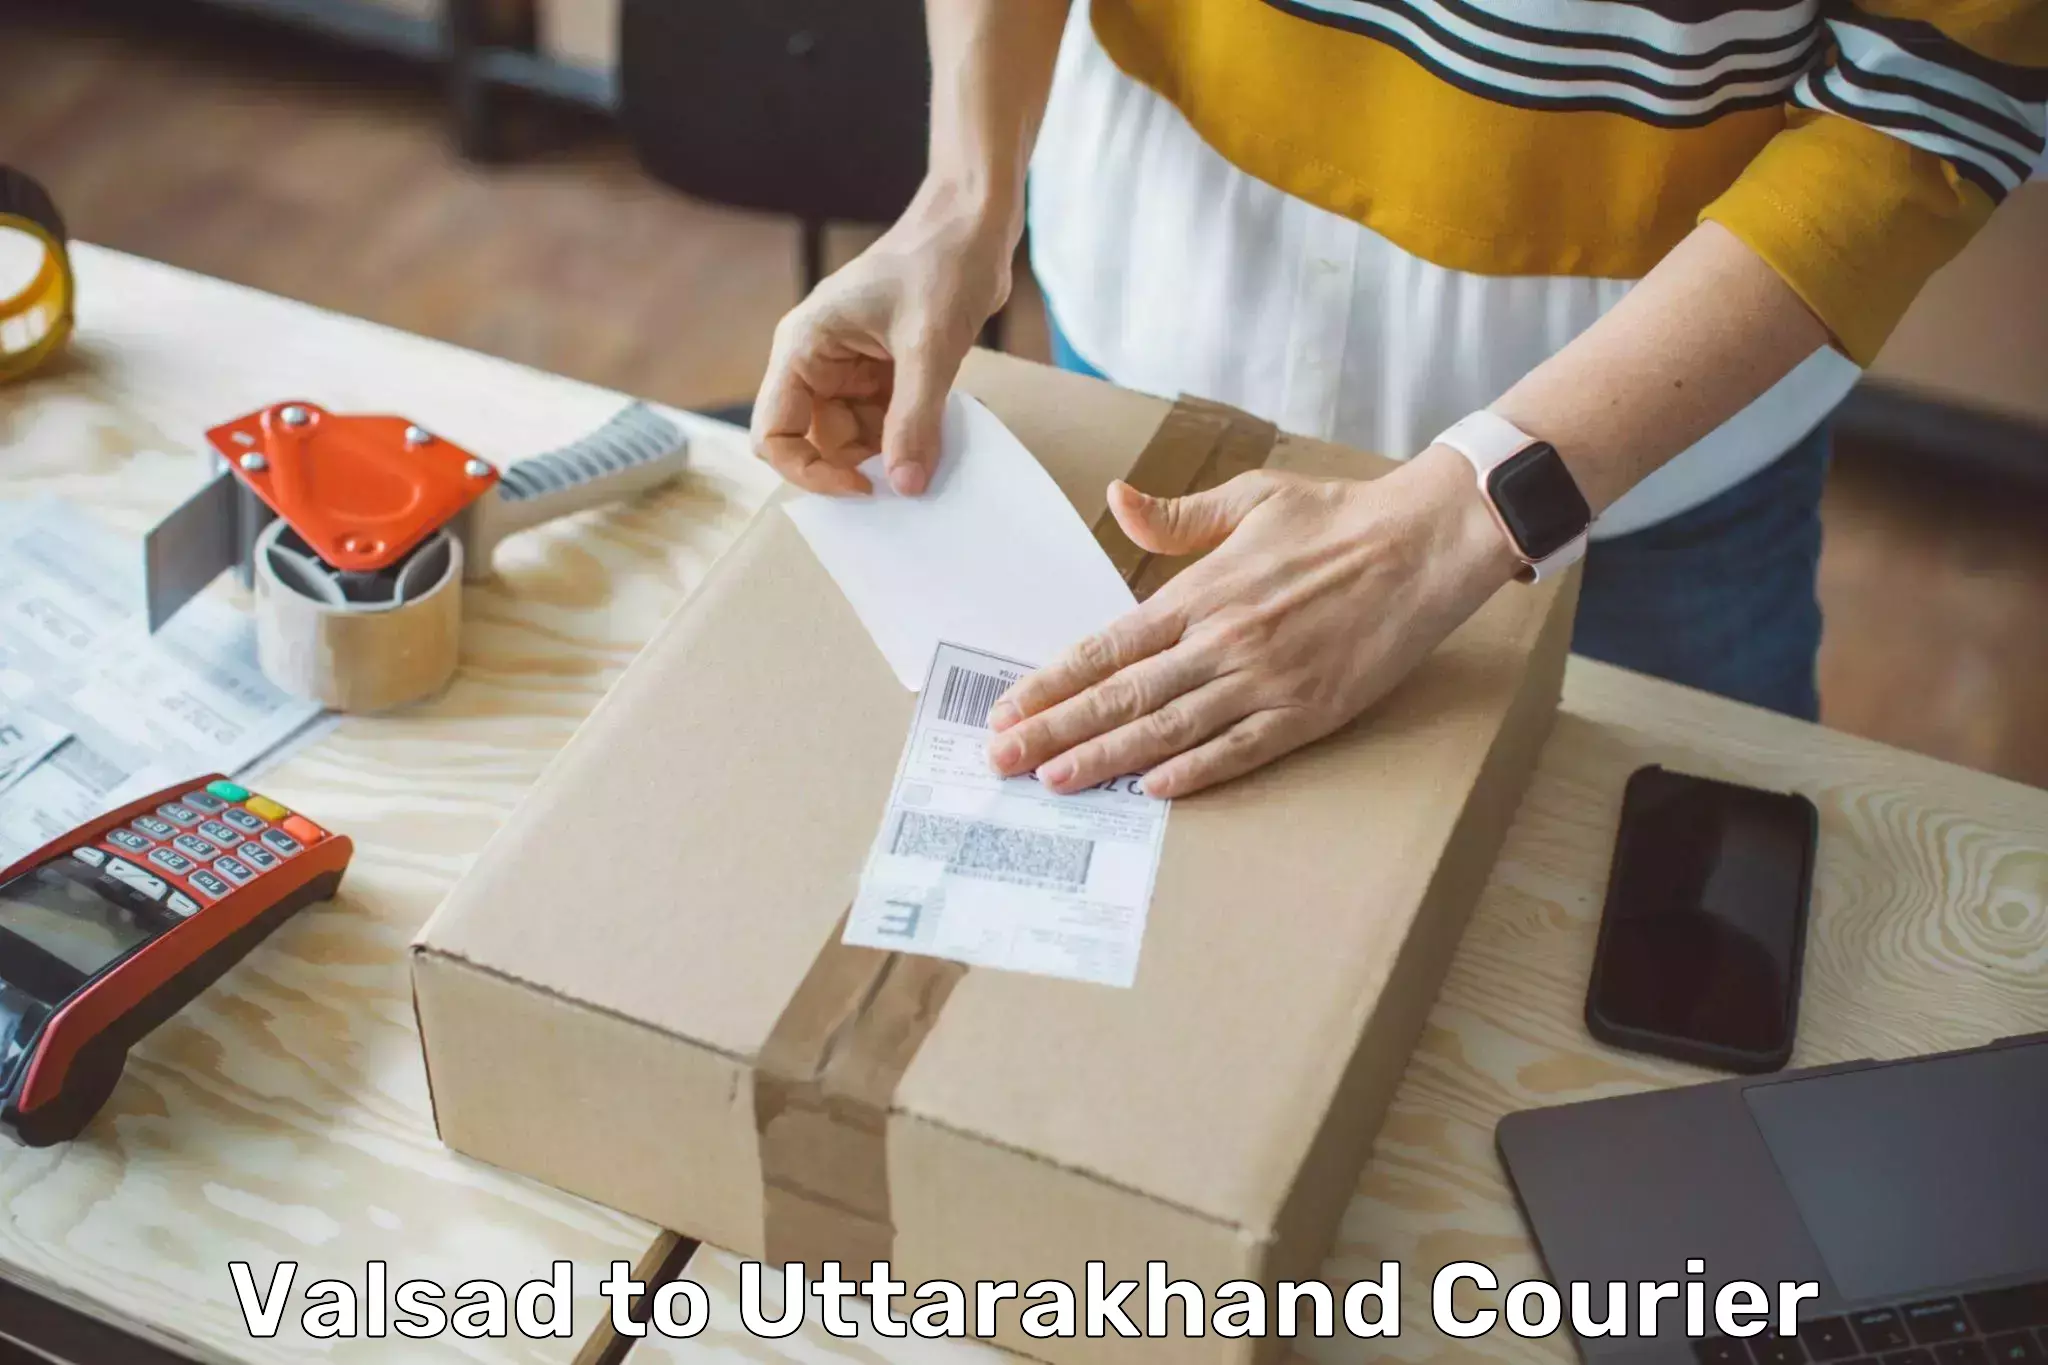 Ocean freight courier in Valsad to Rishikesh